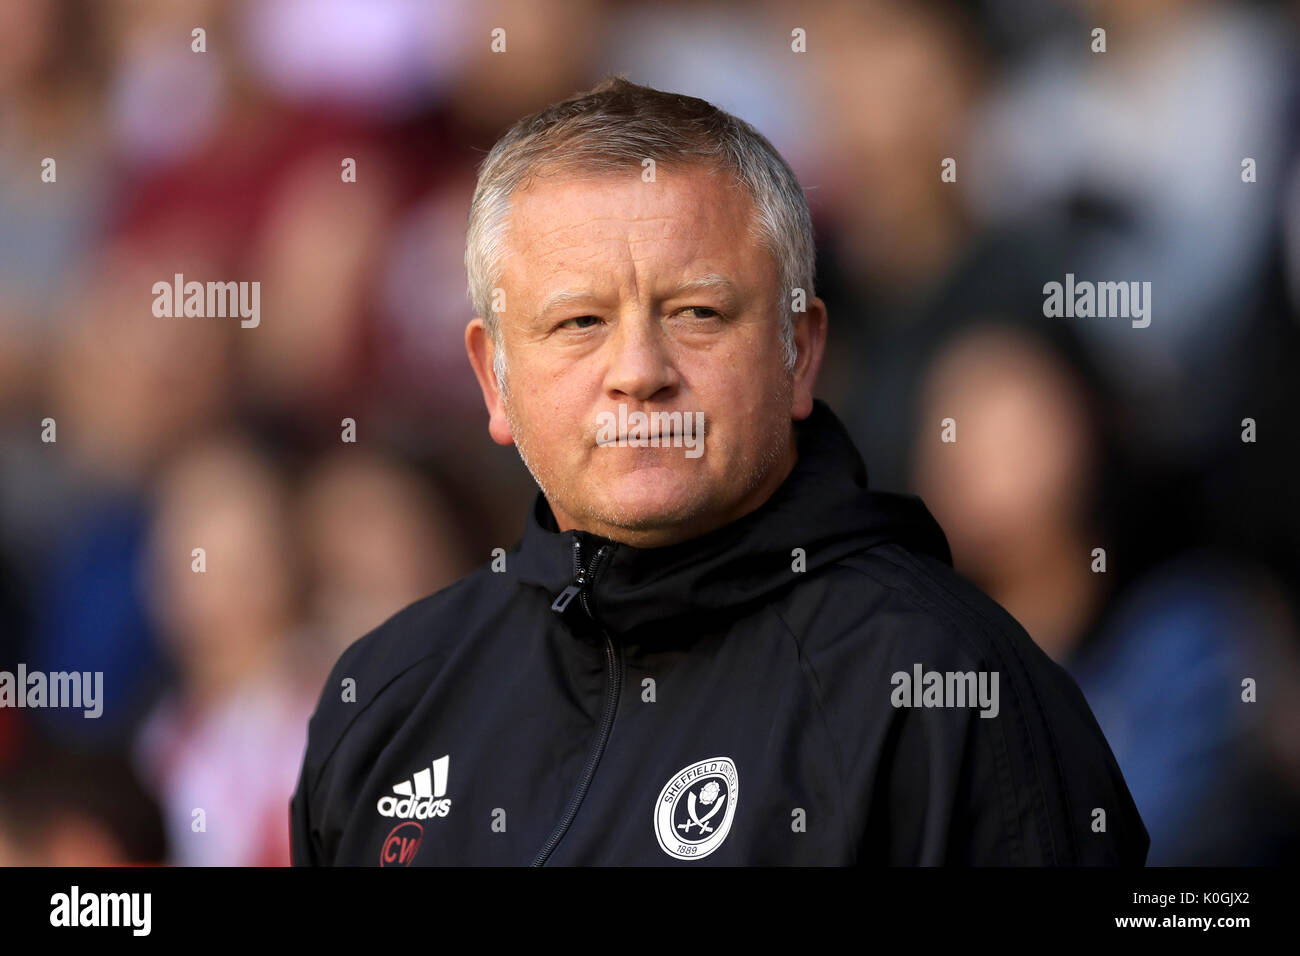 Sheffield United manager Chris Wilder prior to the Carabao Cup, Second Round match at Bramall Lane, Sheffield. PRESS ASSOCIATION Photo. Picture date: Tuesday August 22, 2017. See PA story SOCCER Sheff Utd. Photo credit should read: Tim Goode/PA Wire. RESTRICTIONS: No use with unauthorised audio, video, data, fixture lists, club/league logos or 'live' services. Online in-match use limited to 75 images, no video emulation. No use in betting, games or single club/league/player publications. Stock Photo